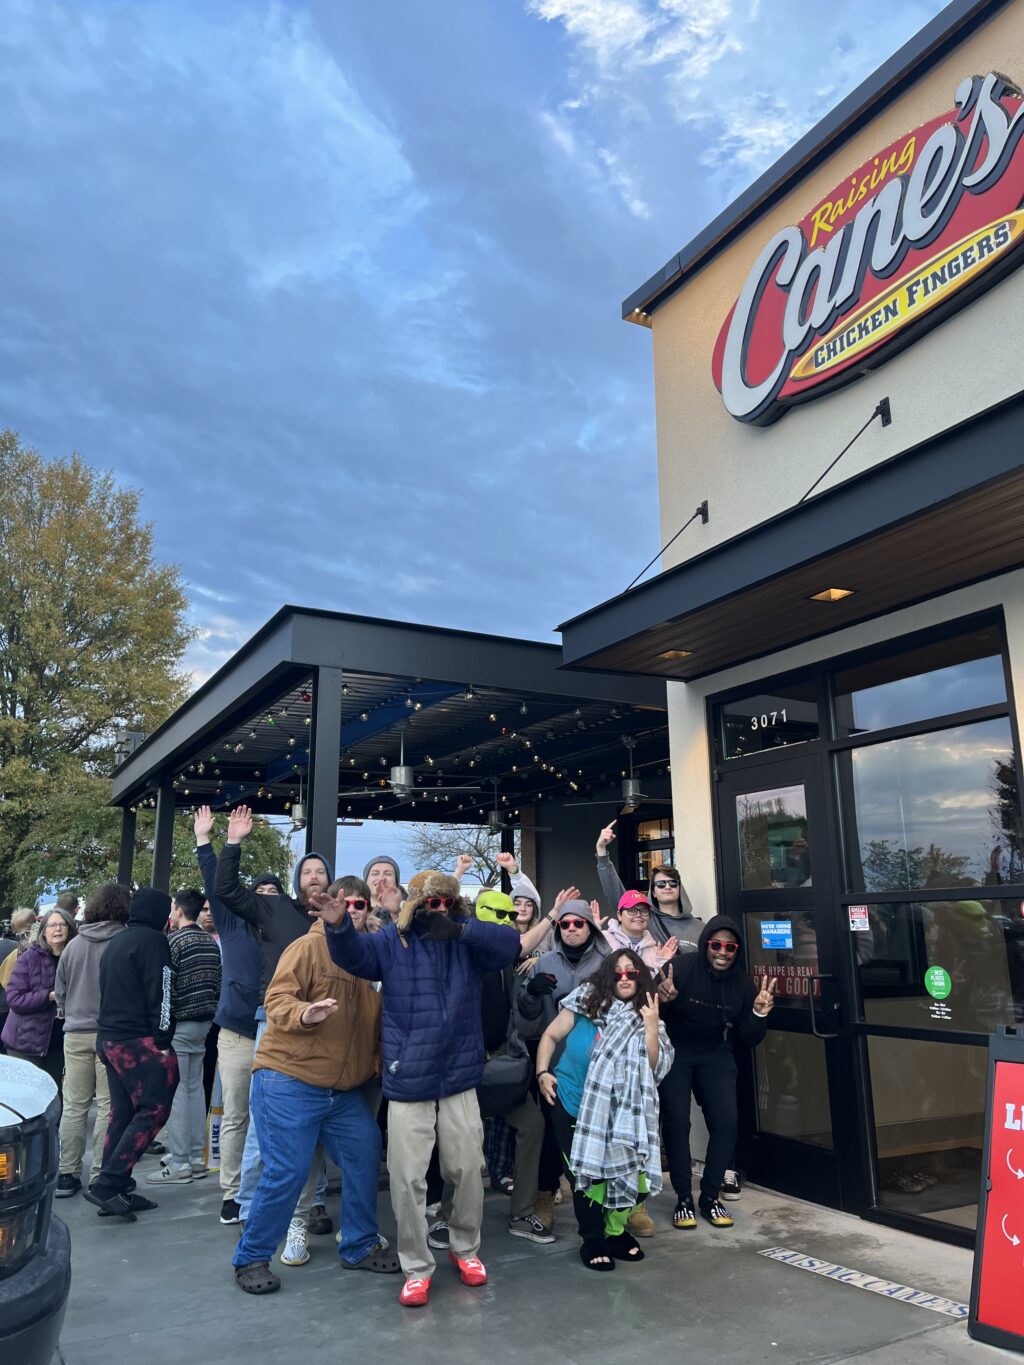 A large group of people in warm clothing outside the popular restaurant chain, Raising Cane's, celebrating and in a happy mood.